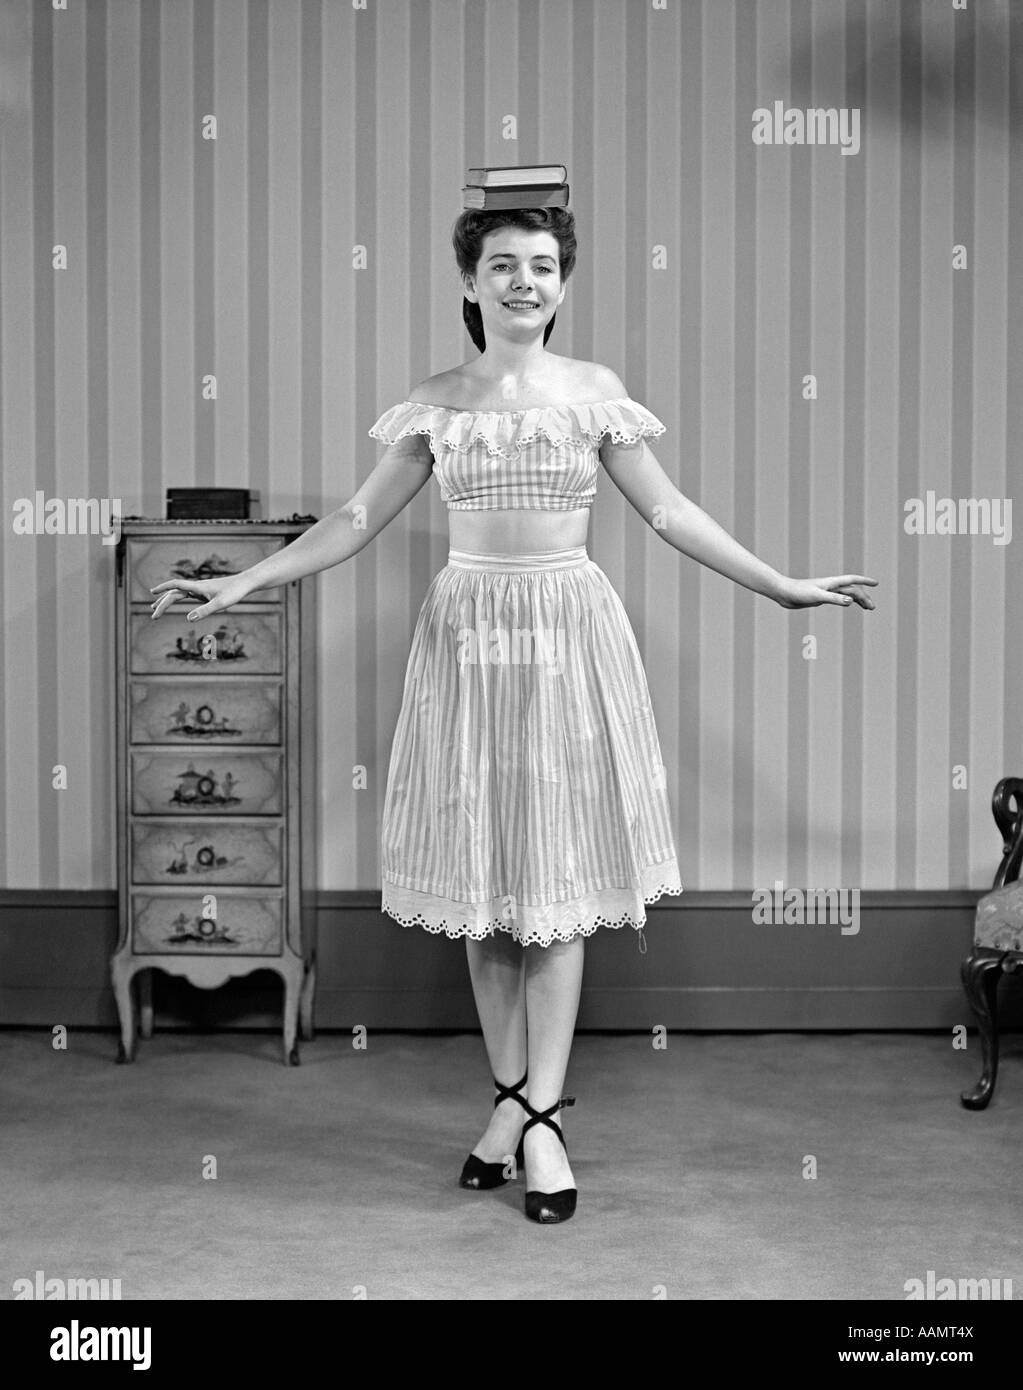 Années 1940 Années 1950, young woman in DRESS BALANCING BOOKS ON HEAD Banque D'Images